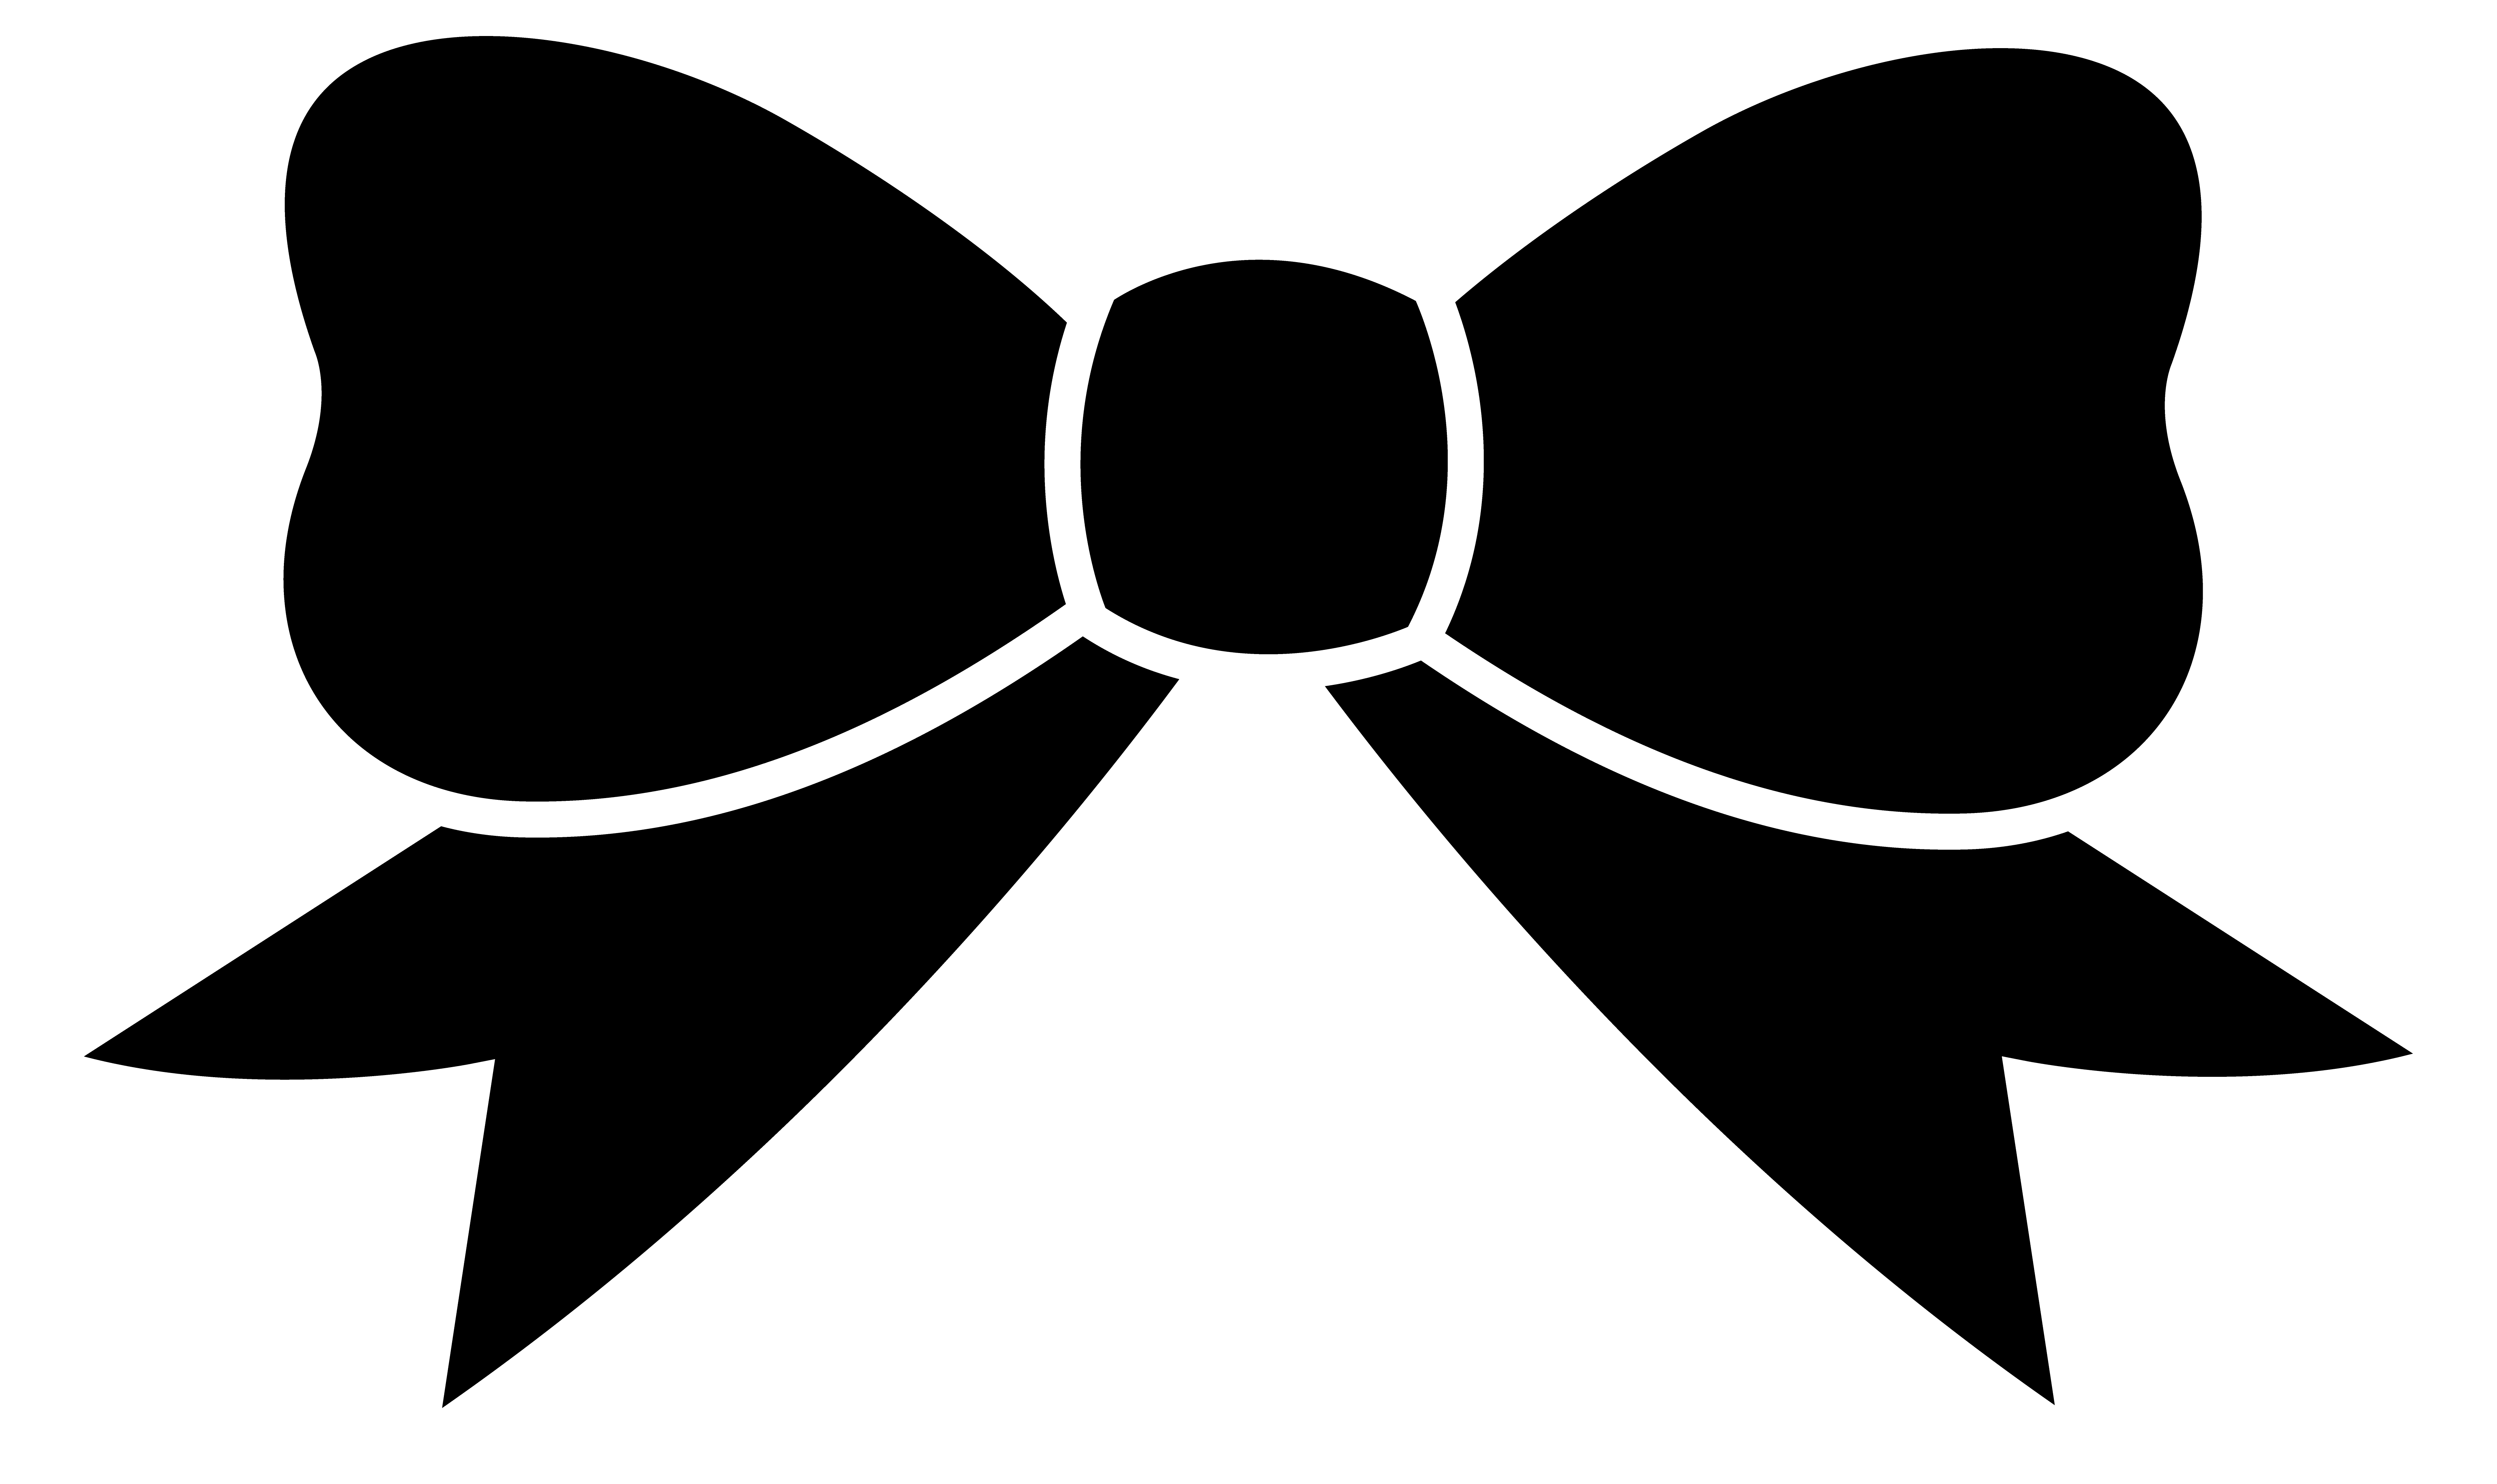 Free Bow Outline, Download Free Bow Outline png images, Free ClipArts